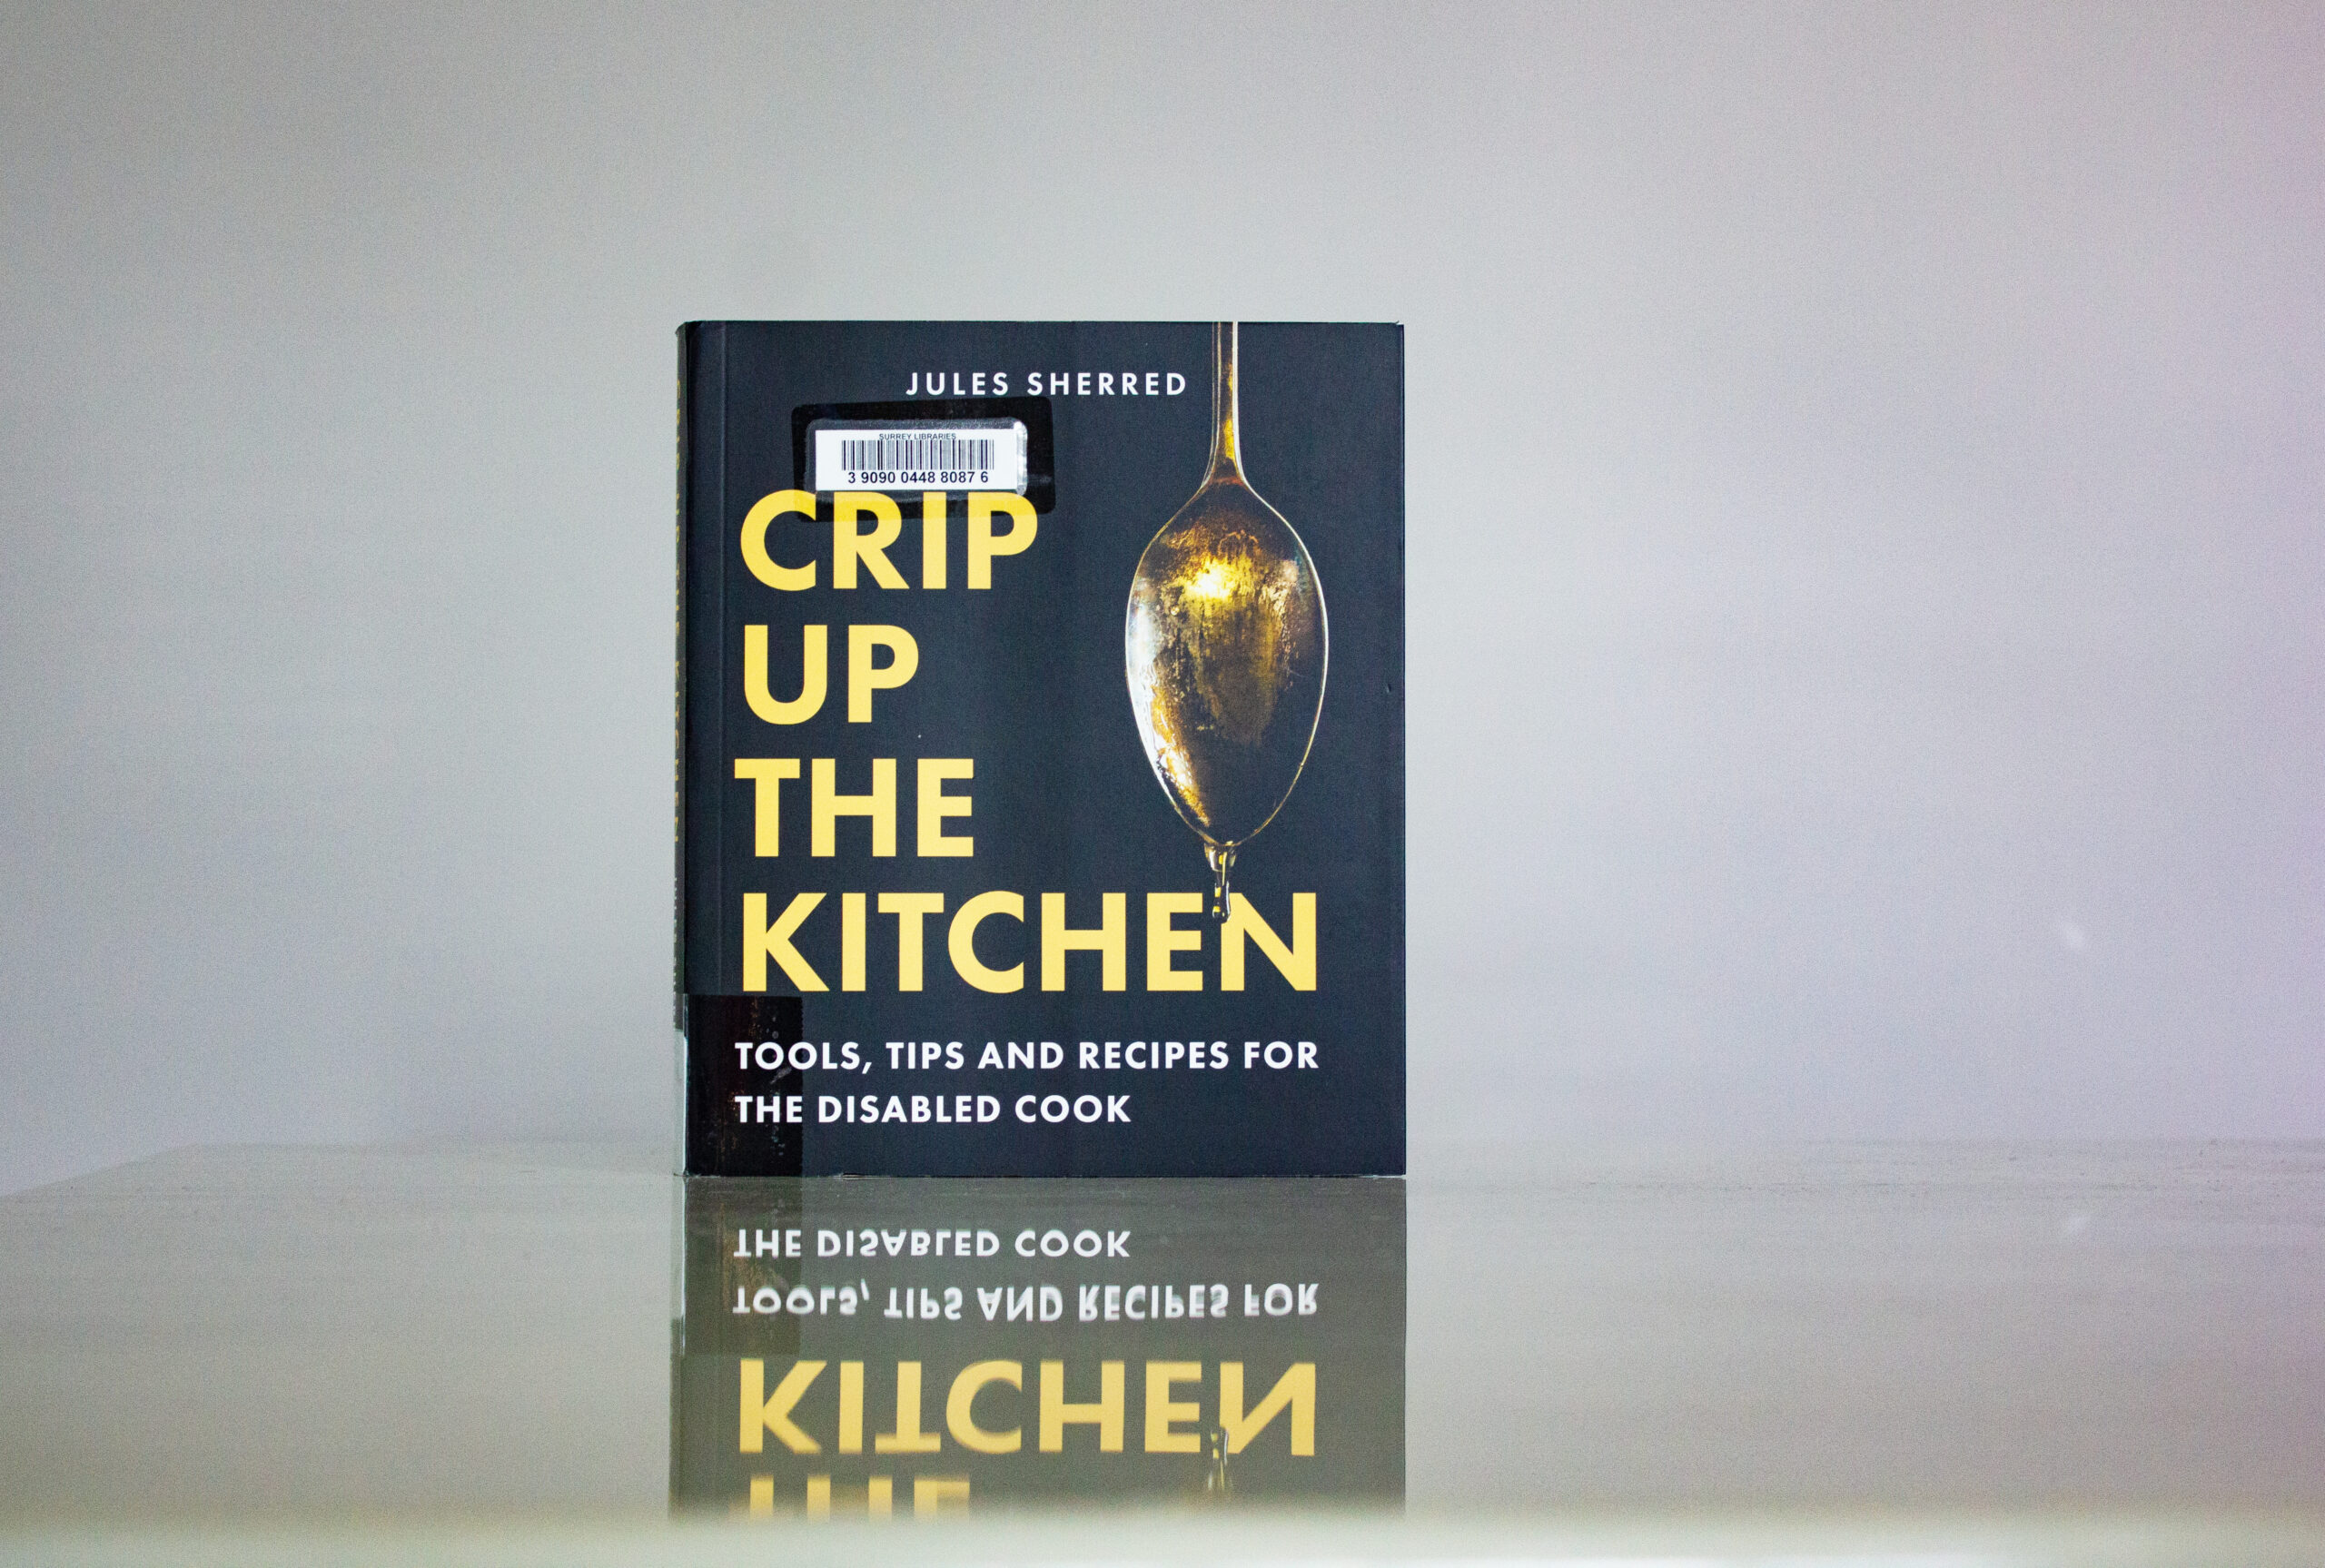 A photo of the hardcover book with the title “Crip Up the Kitchen.”